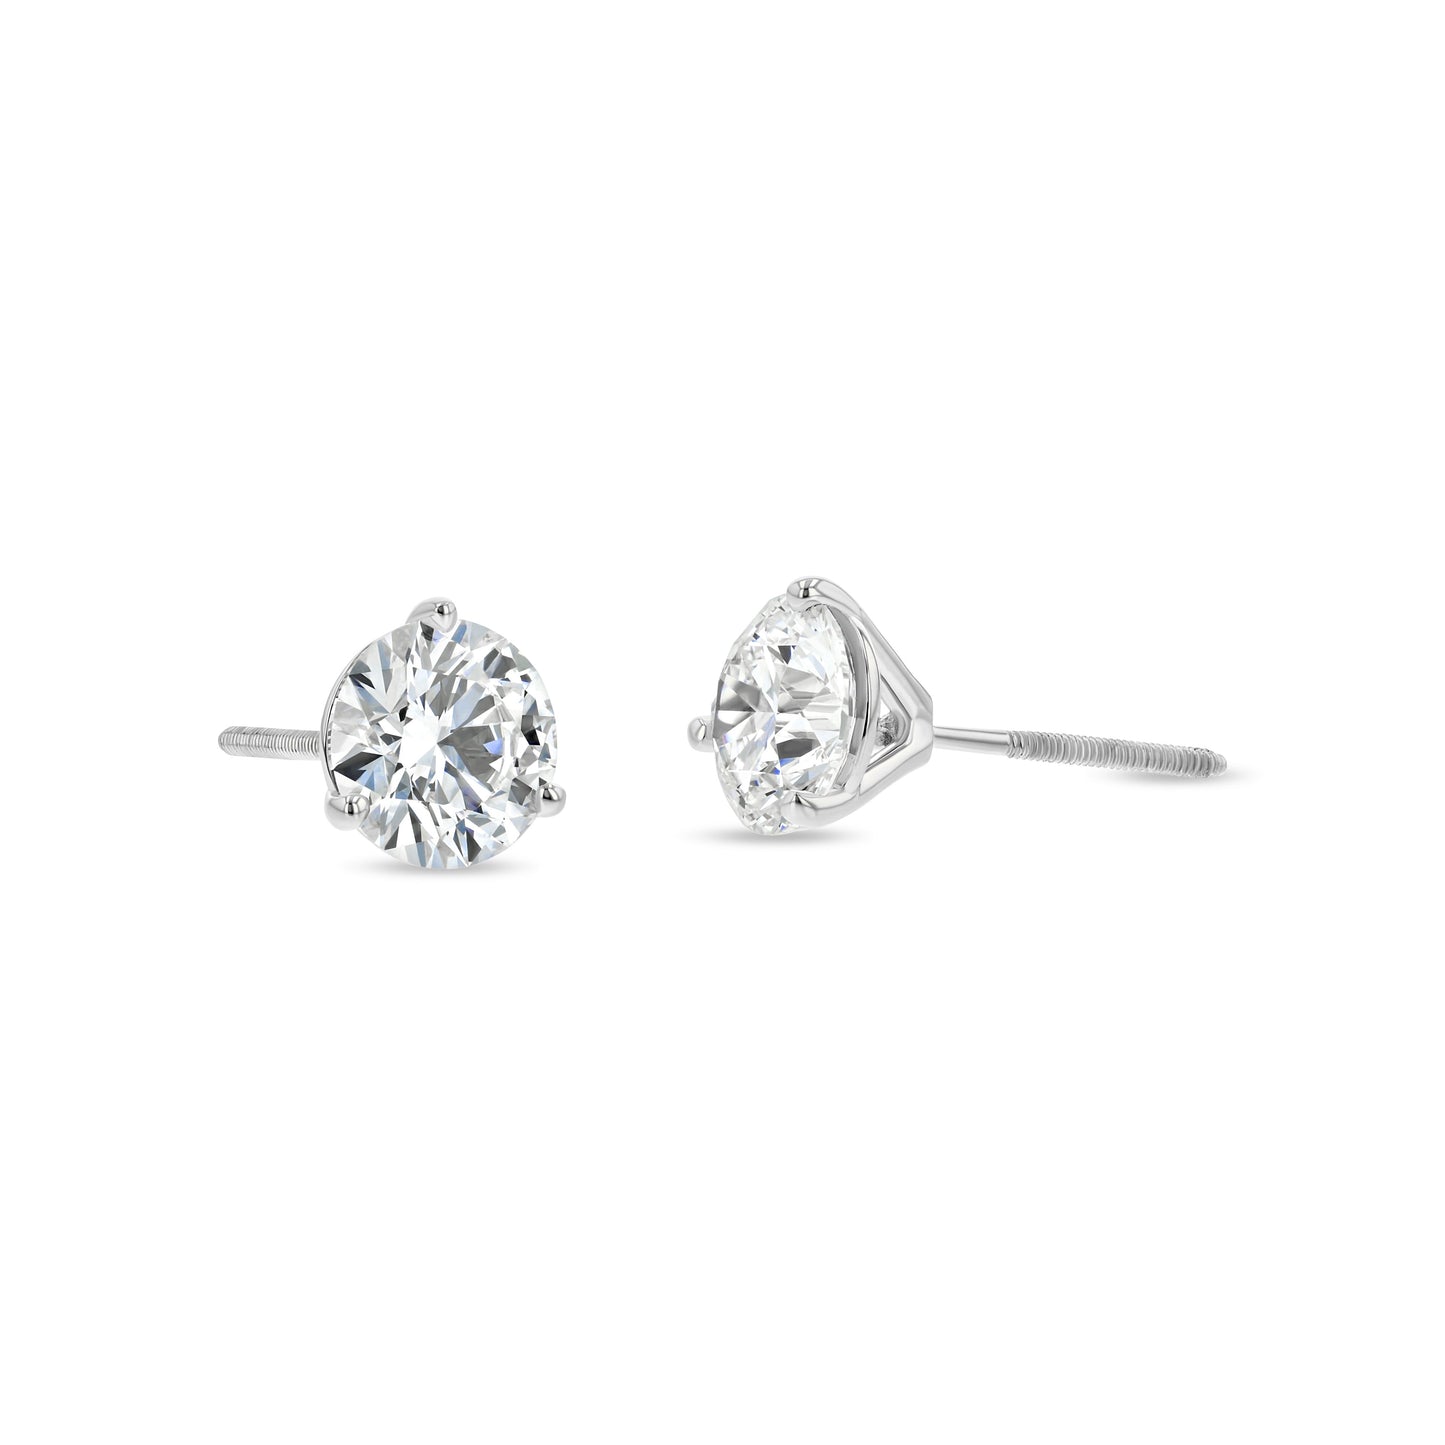 18k White Gold 3-prong Martini Round Diamond Stud Earrings 1/2ctw (4.0mm Ea), M-n Color, Si2-si3 Clarity